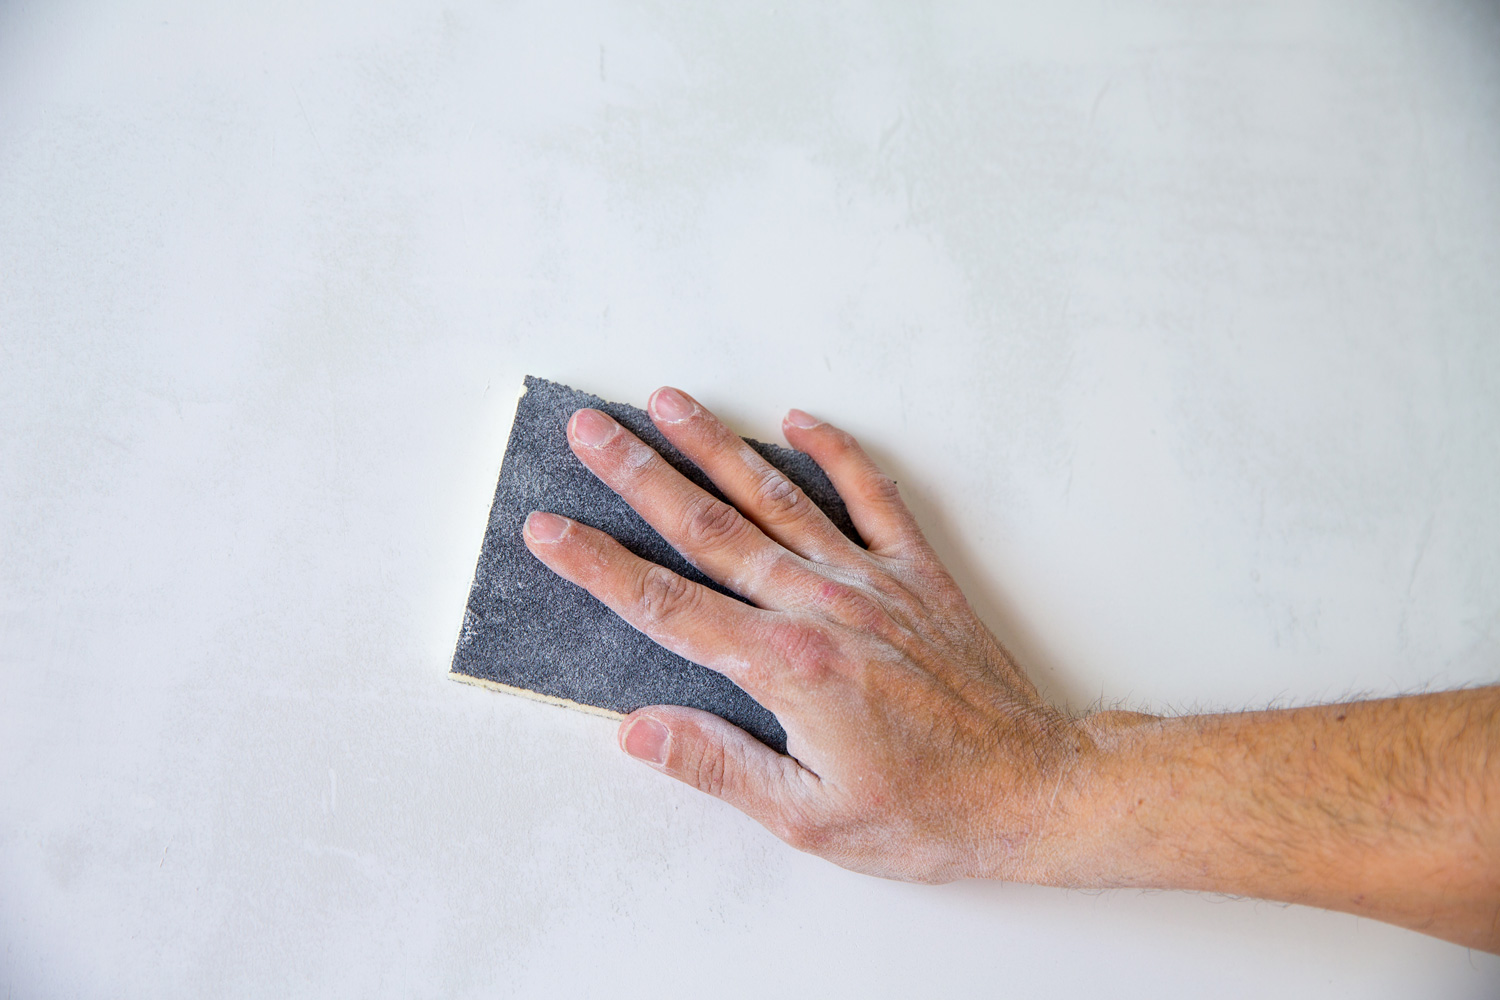 What Grit Sandpaper To Use For Sanding Spackle